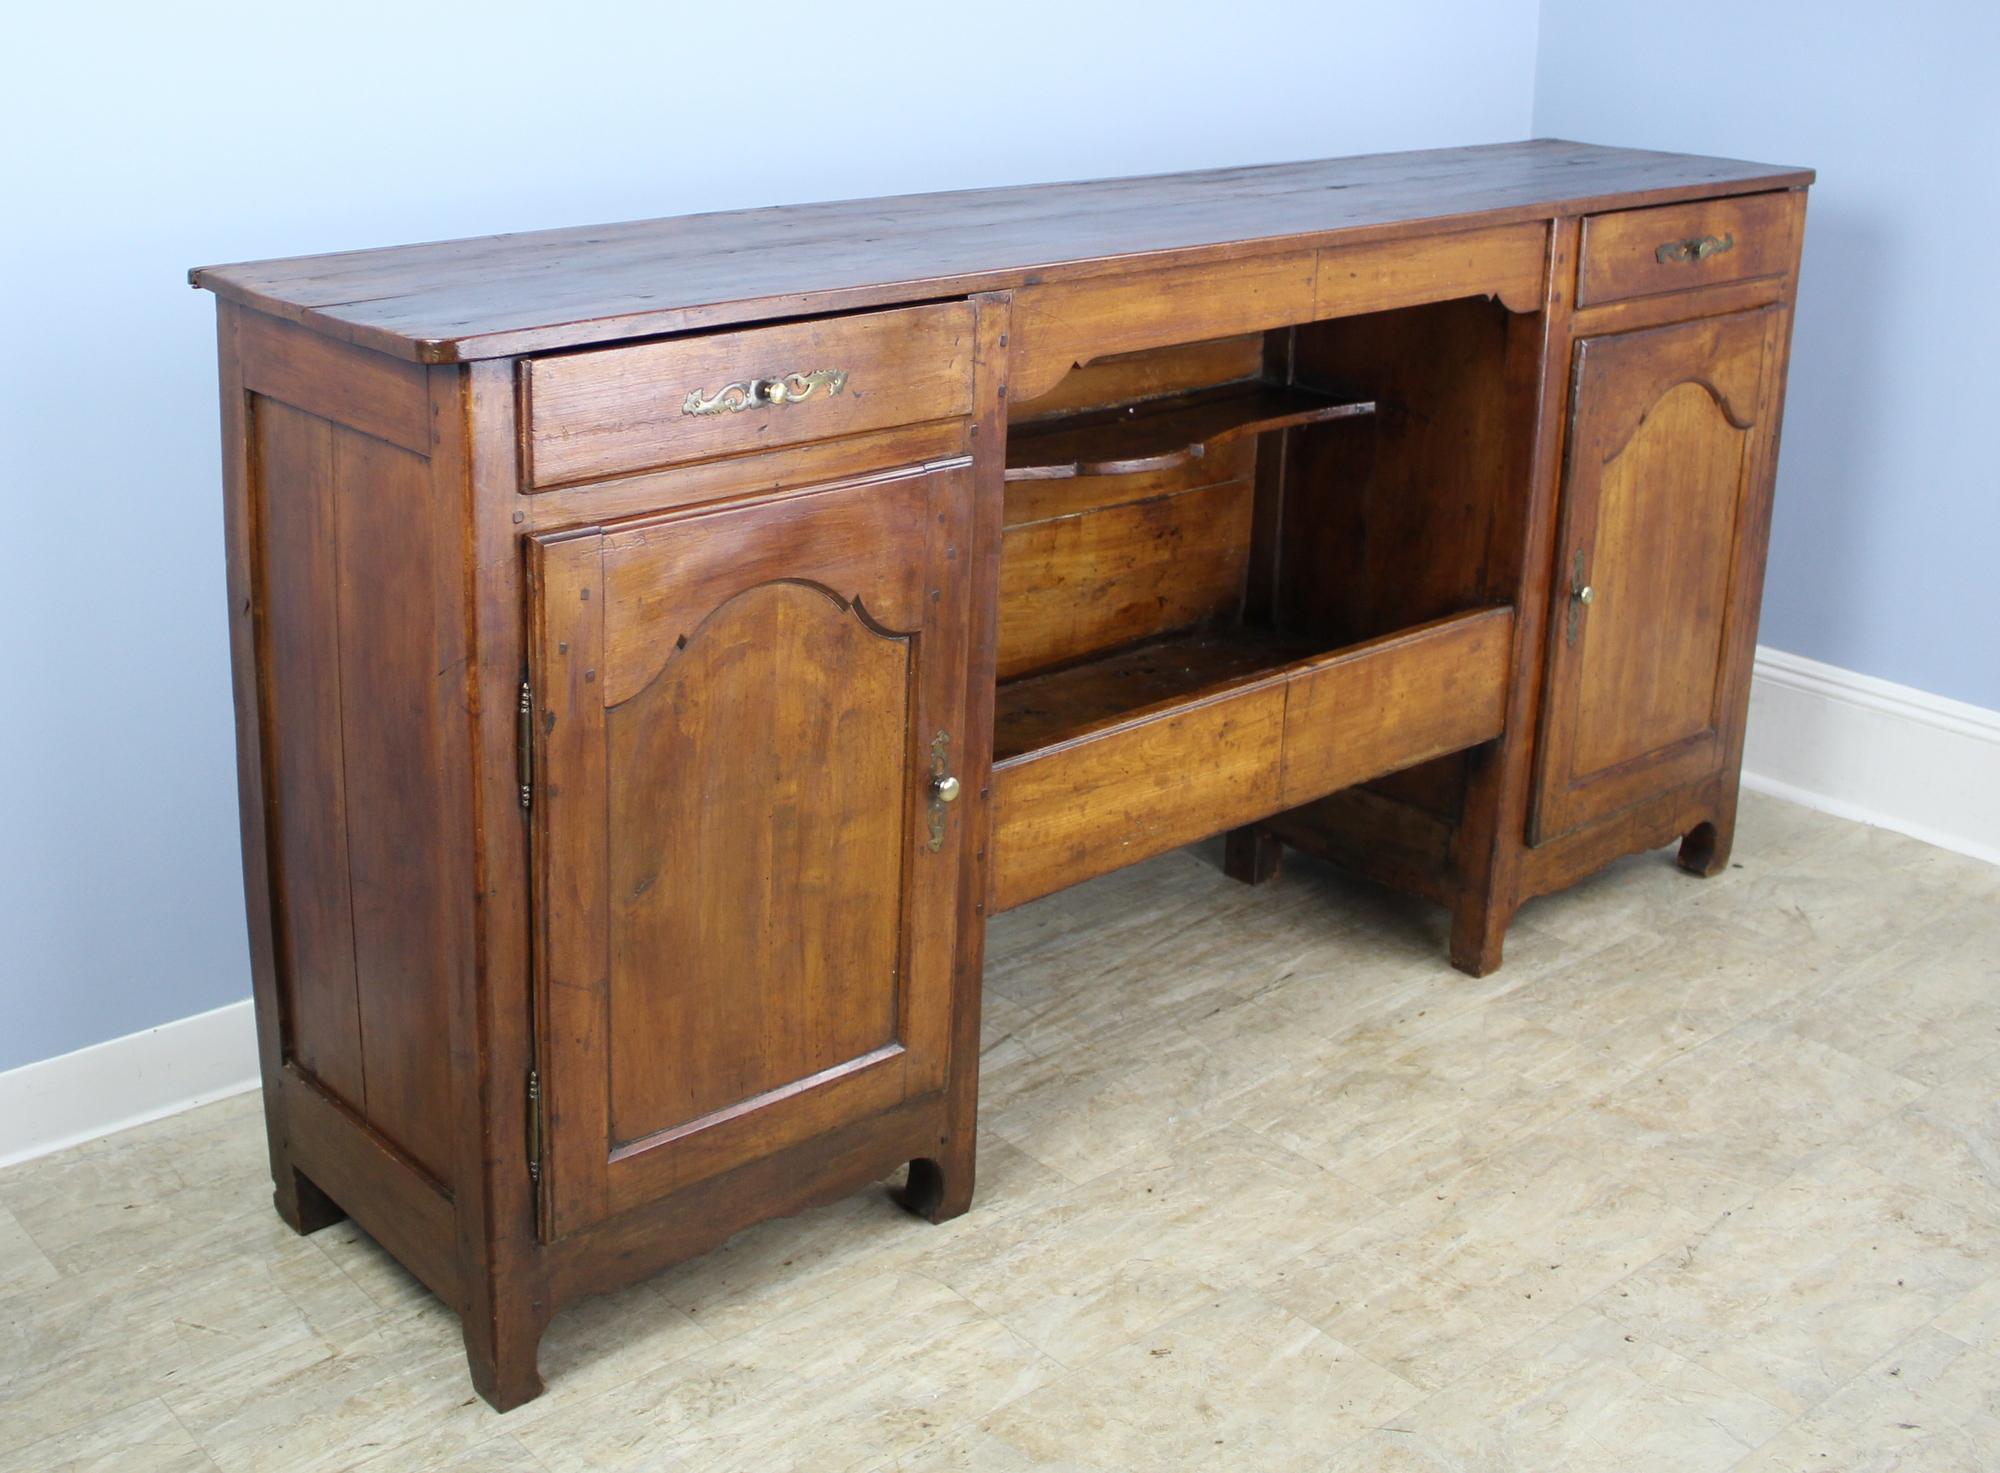 A large cherry enfilade or buffet in warm cherry with several interesting features. The open centre has a decoratively carved shelf and an enclosed lower storage area for utility. The cupboards on either side have two non-adjustable shelves, and the